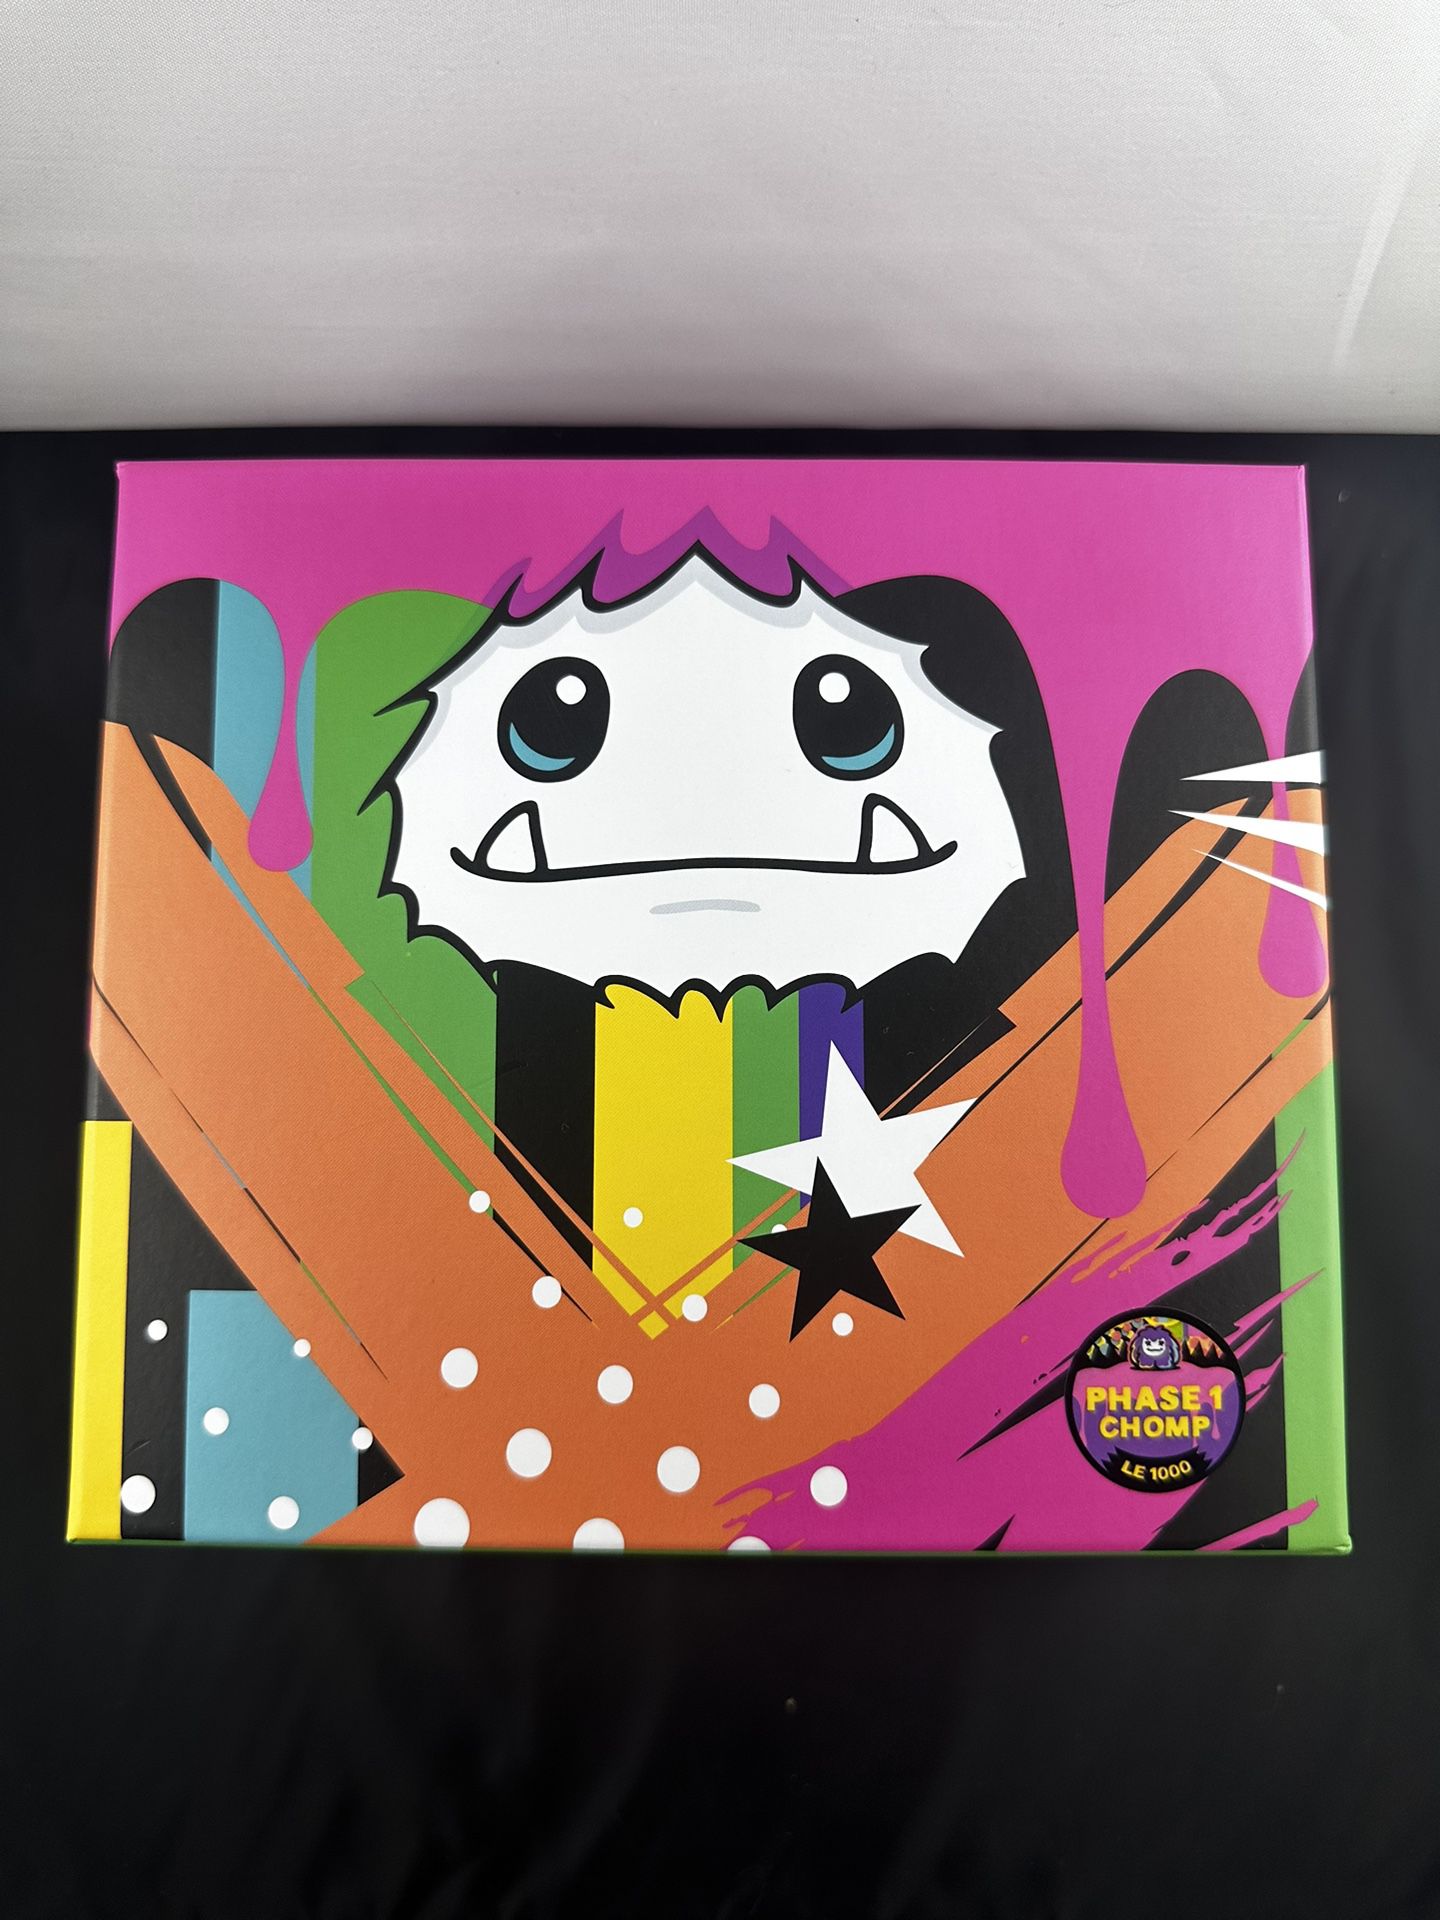 Abominable Toys Chomp Phase 1 By Sket One Limited Edition 1000 + Trading Card